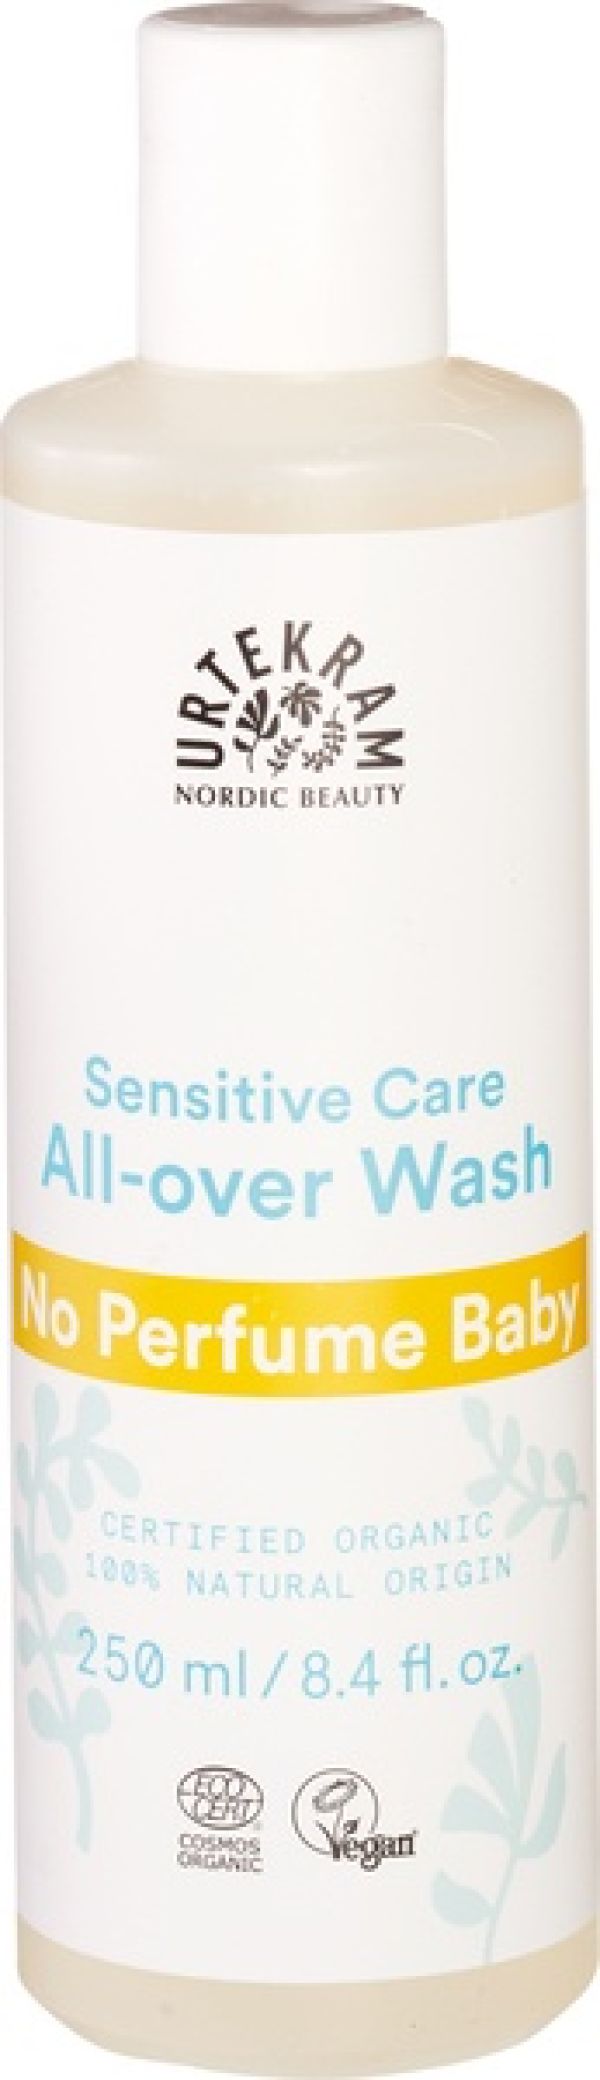 No perfume baby all-over wash